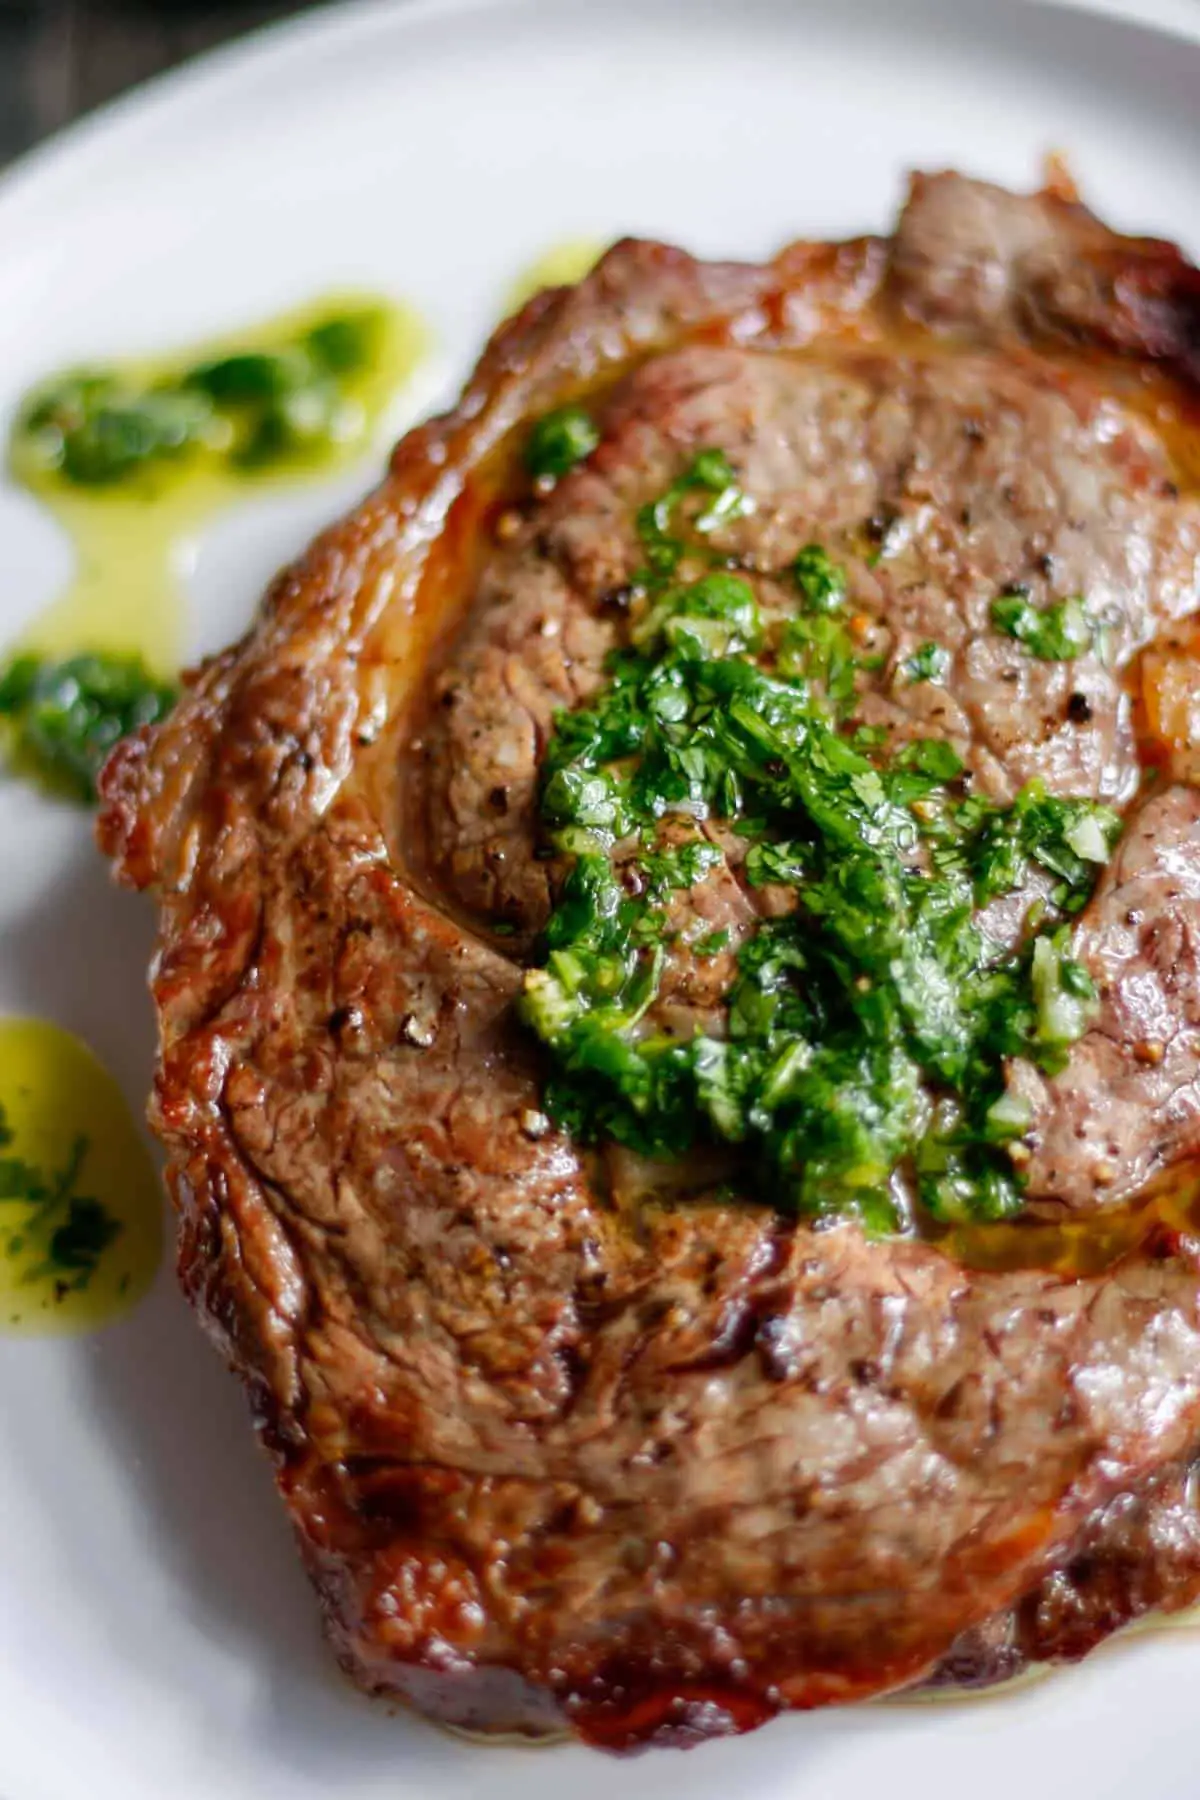 A cooked ribeye steak on a white plate which is topped with a cilantro garlic sauce and the sauce is also drizzled on the plate next to the steak.